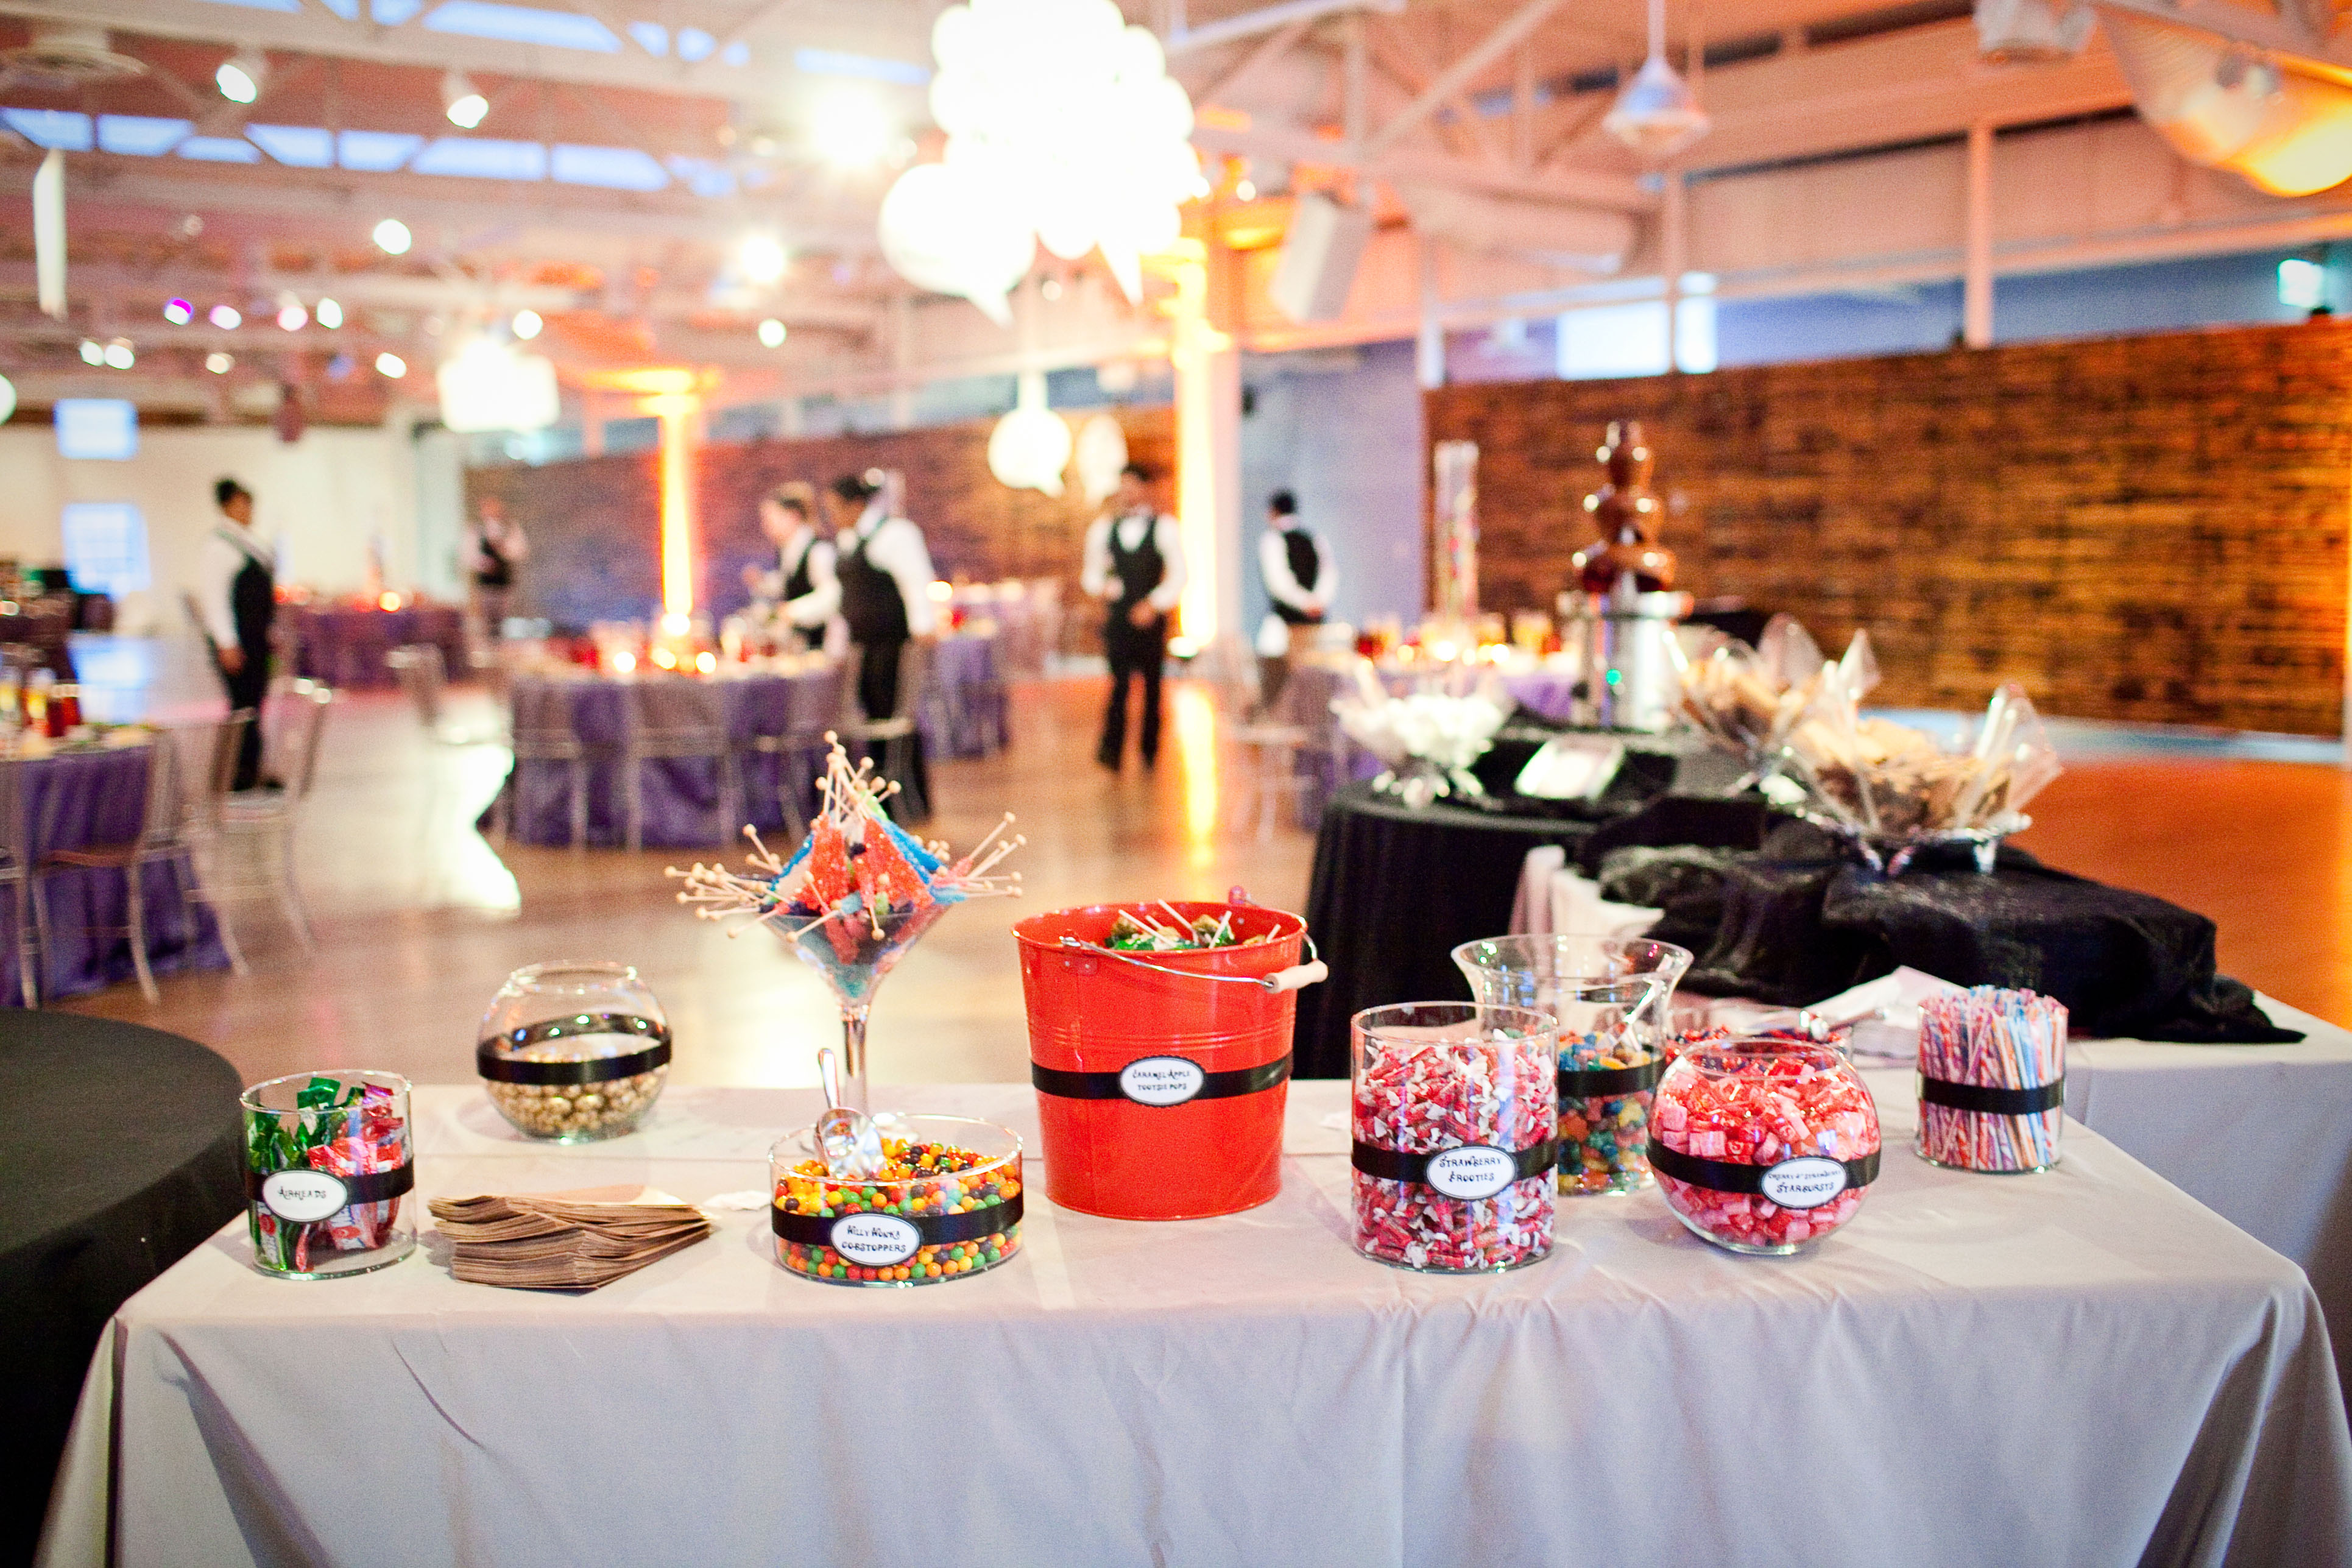 candy buffet with gumballs, pixie sticks, gobstoppers and more